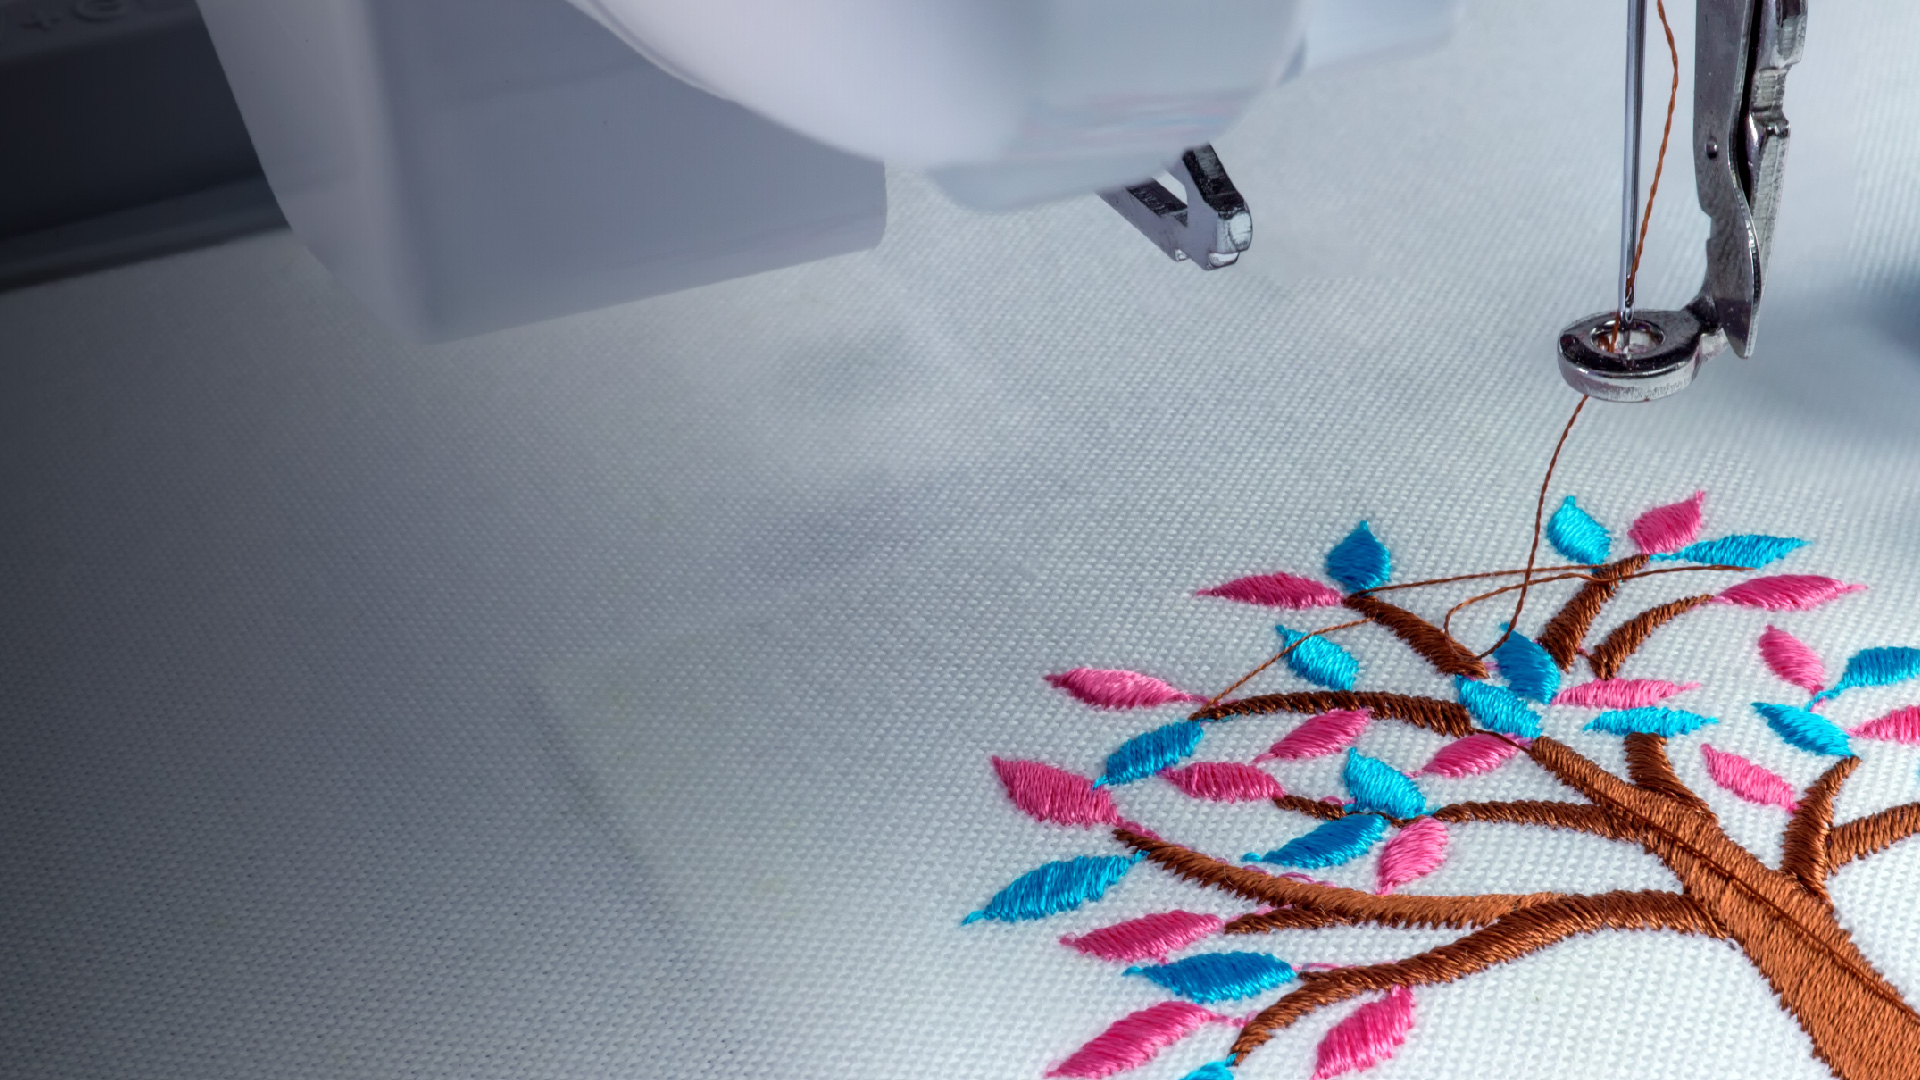 How to Pick the Right Embroidery Thread for a Machine?